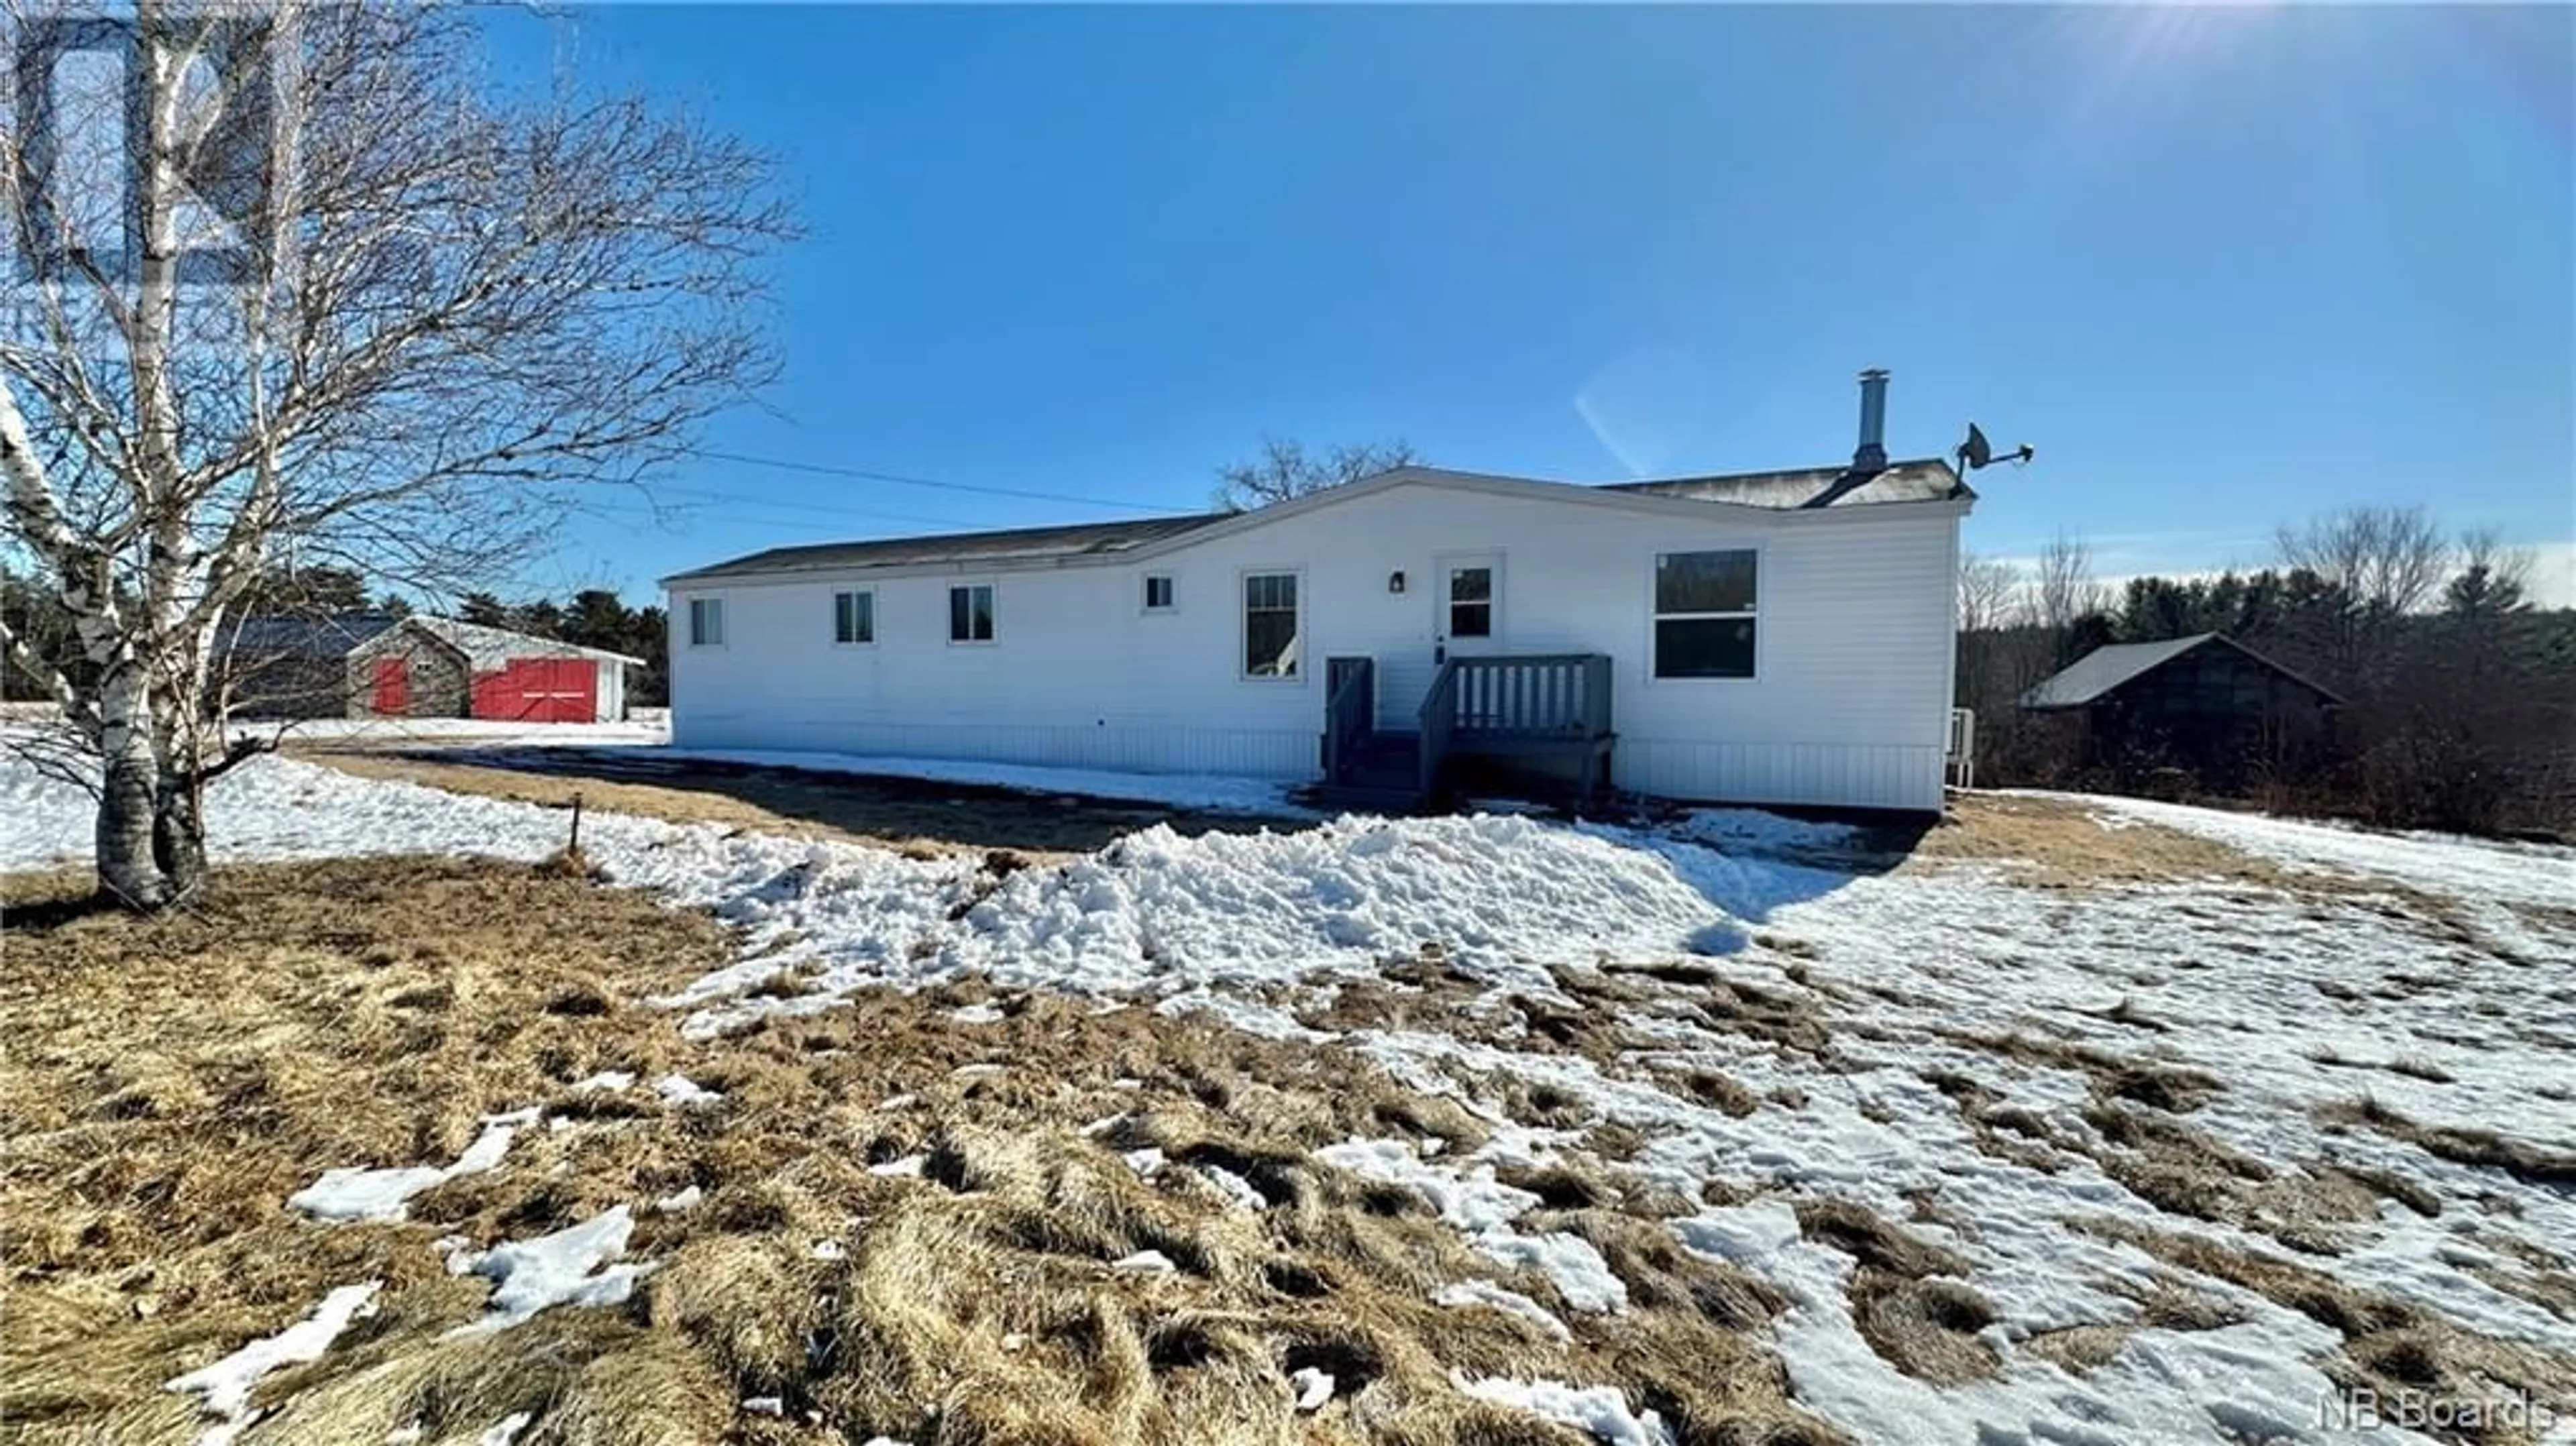 Home with unknown exterior material for 1661 Route 102, Upper Gagetown New Brunswick E5M2S6